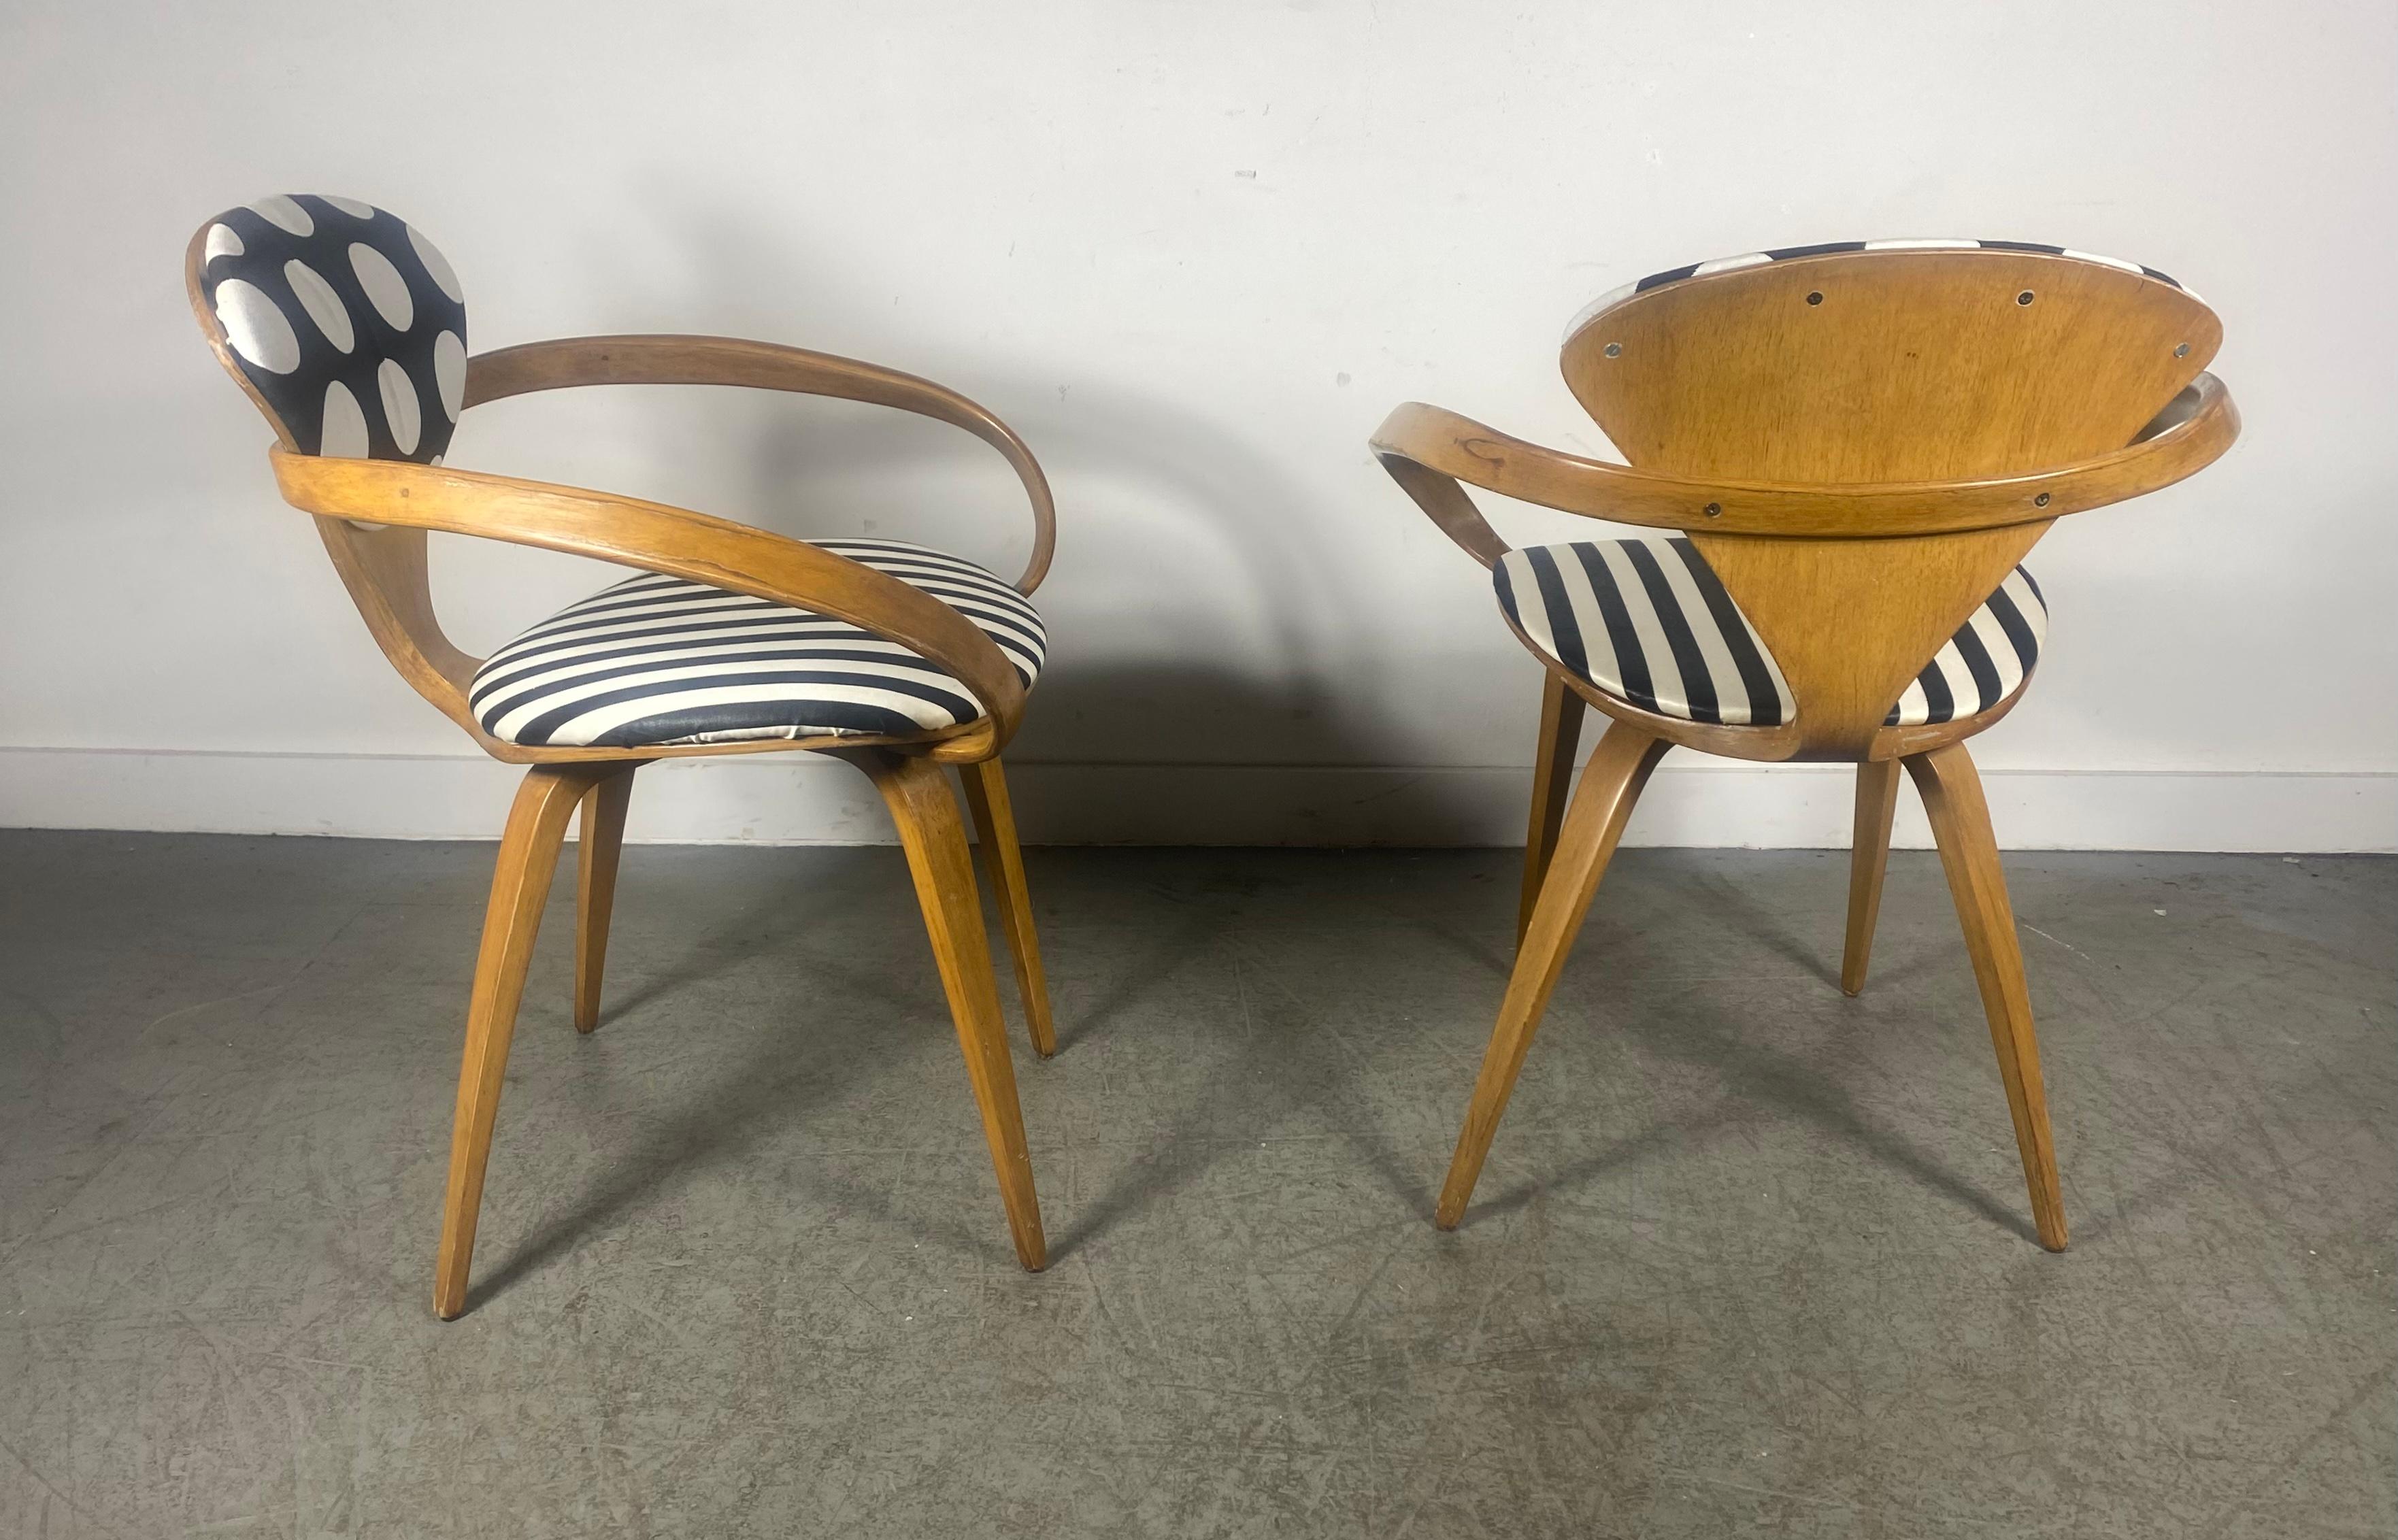 Classic Pair Of Vintage Norman Cherner for Plycraft Pretzel Armchairs c. 1950's... Great early example,, Seat and back reupholstered in a fun pok a dot and stripped black and white fabric,,can easily be upholstered to your liking.. Wonderful warm